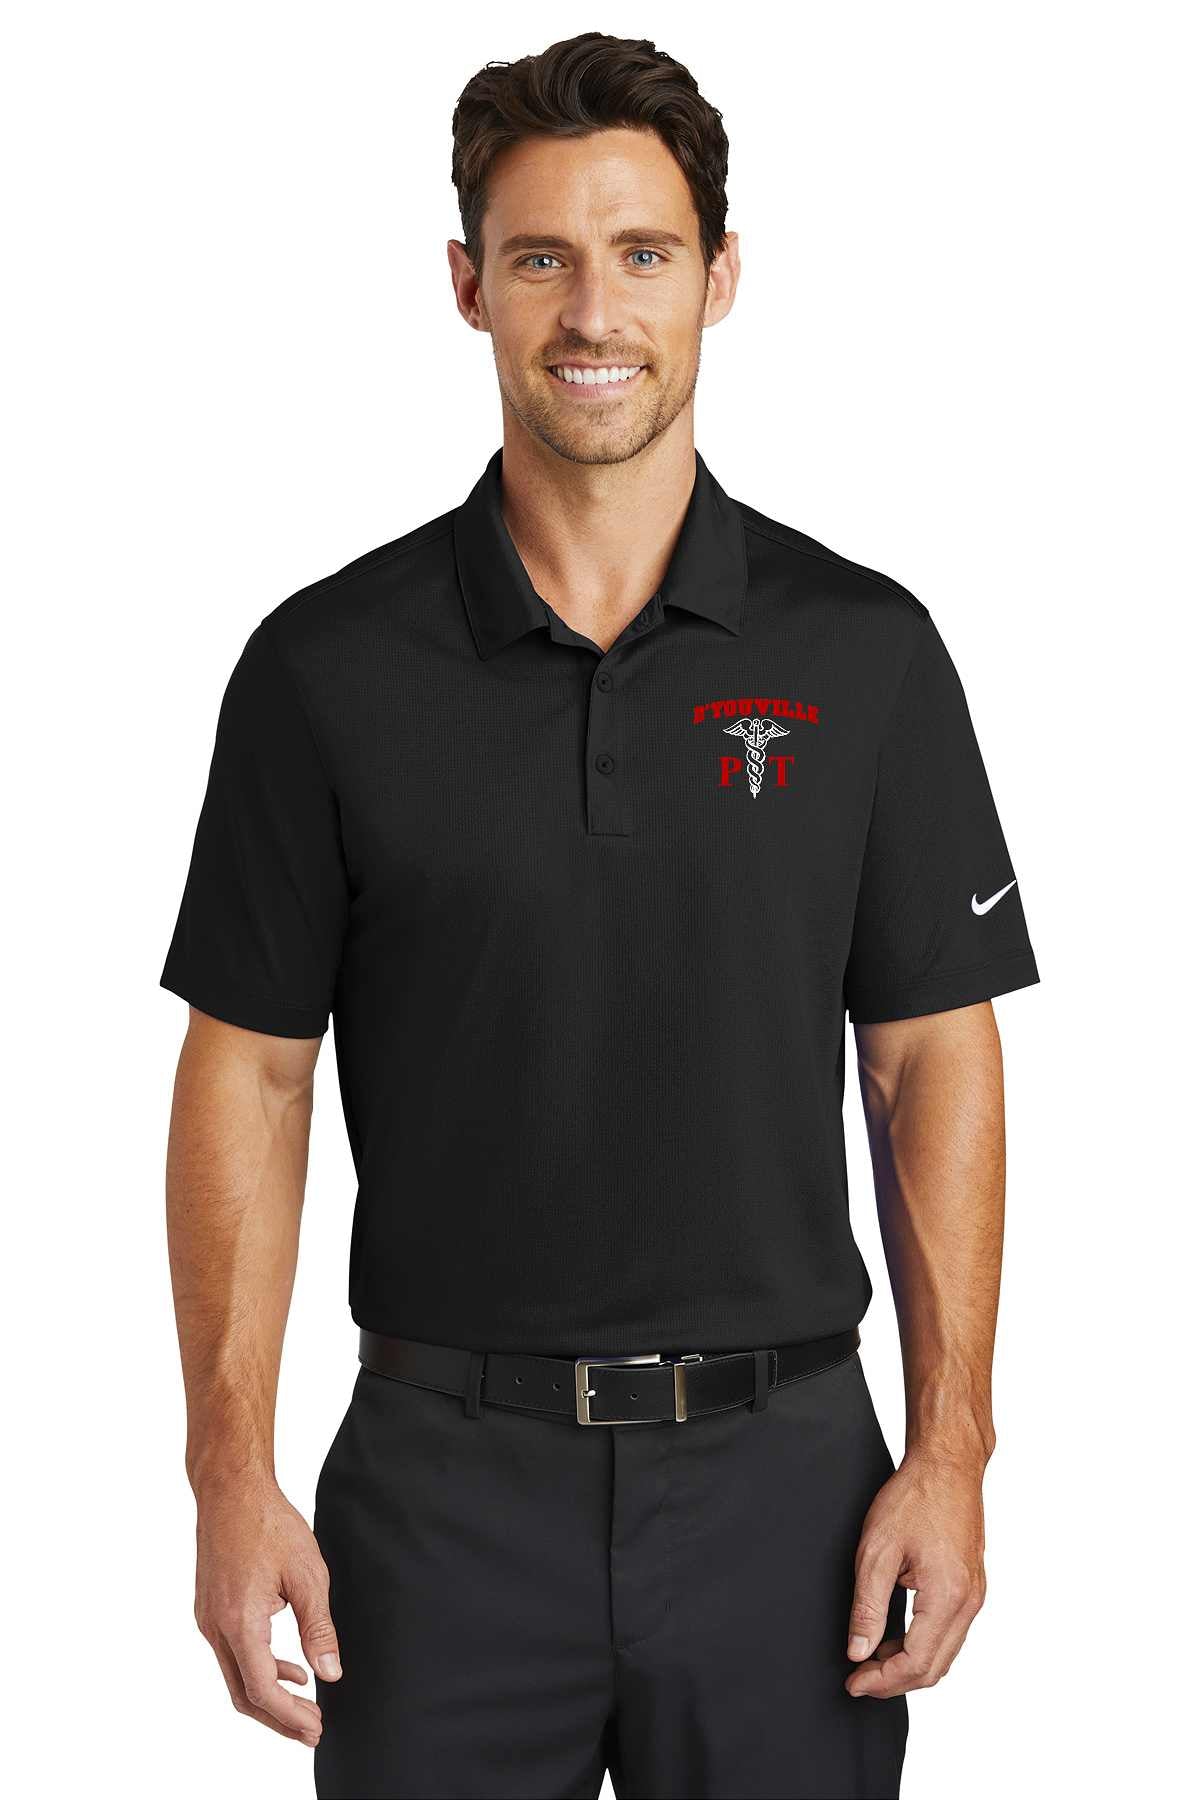 D'Youville Physical Therapy 637167 Nike Dri-FIT Vertical Mesh Polo